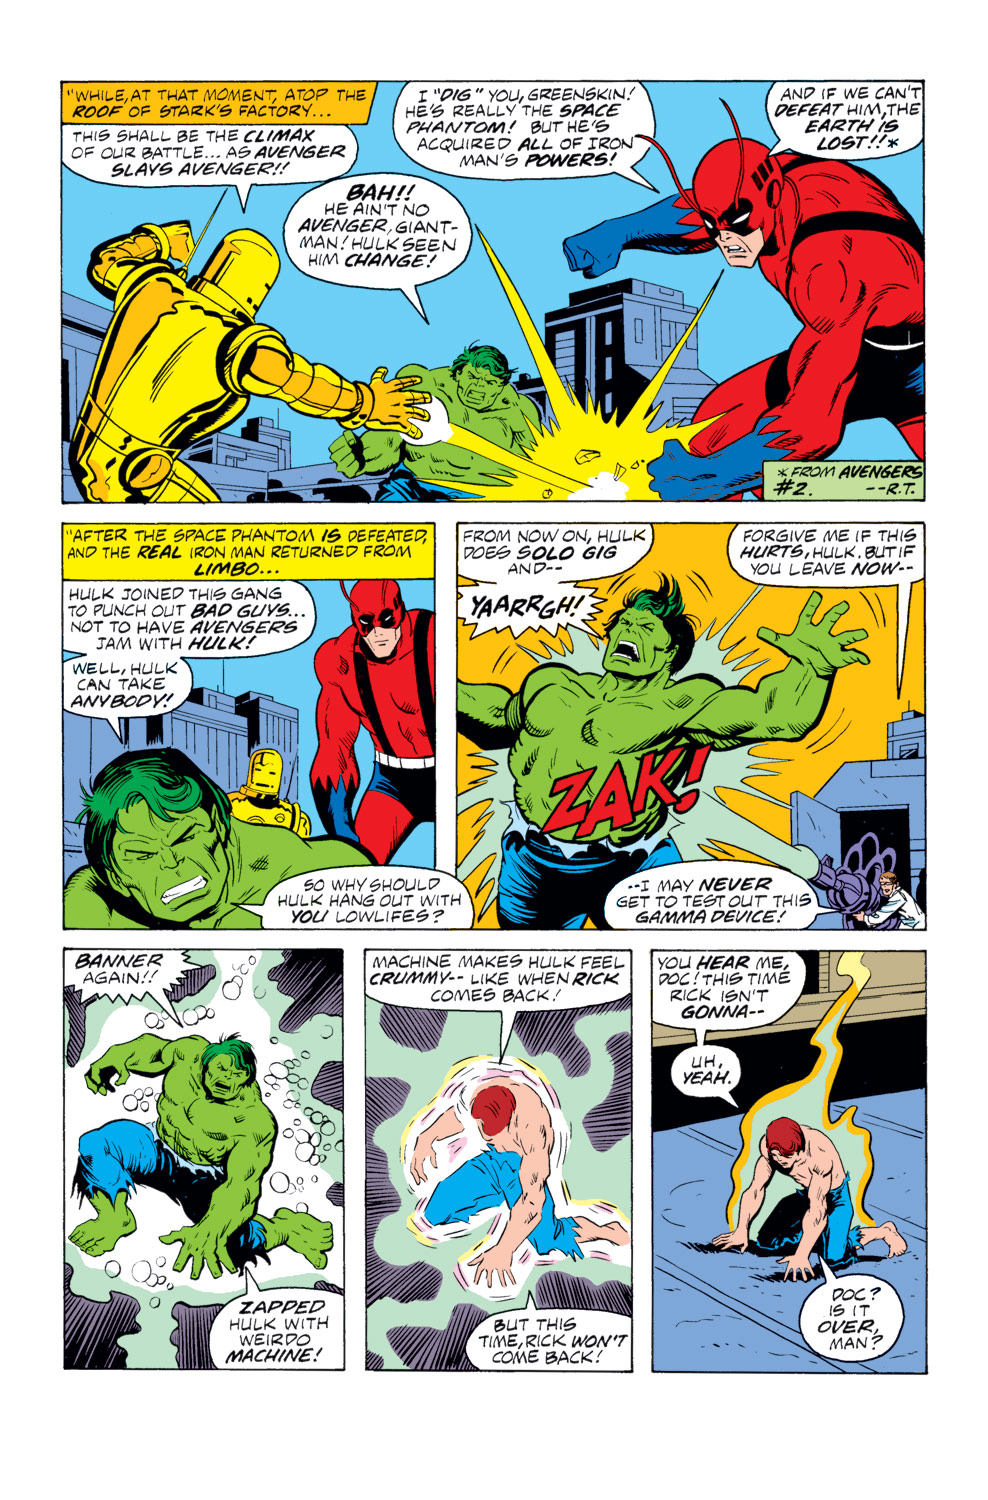 What If? (1977) issue 12 - Rick Jones had become the Hulk - Page 12